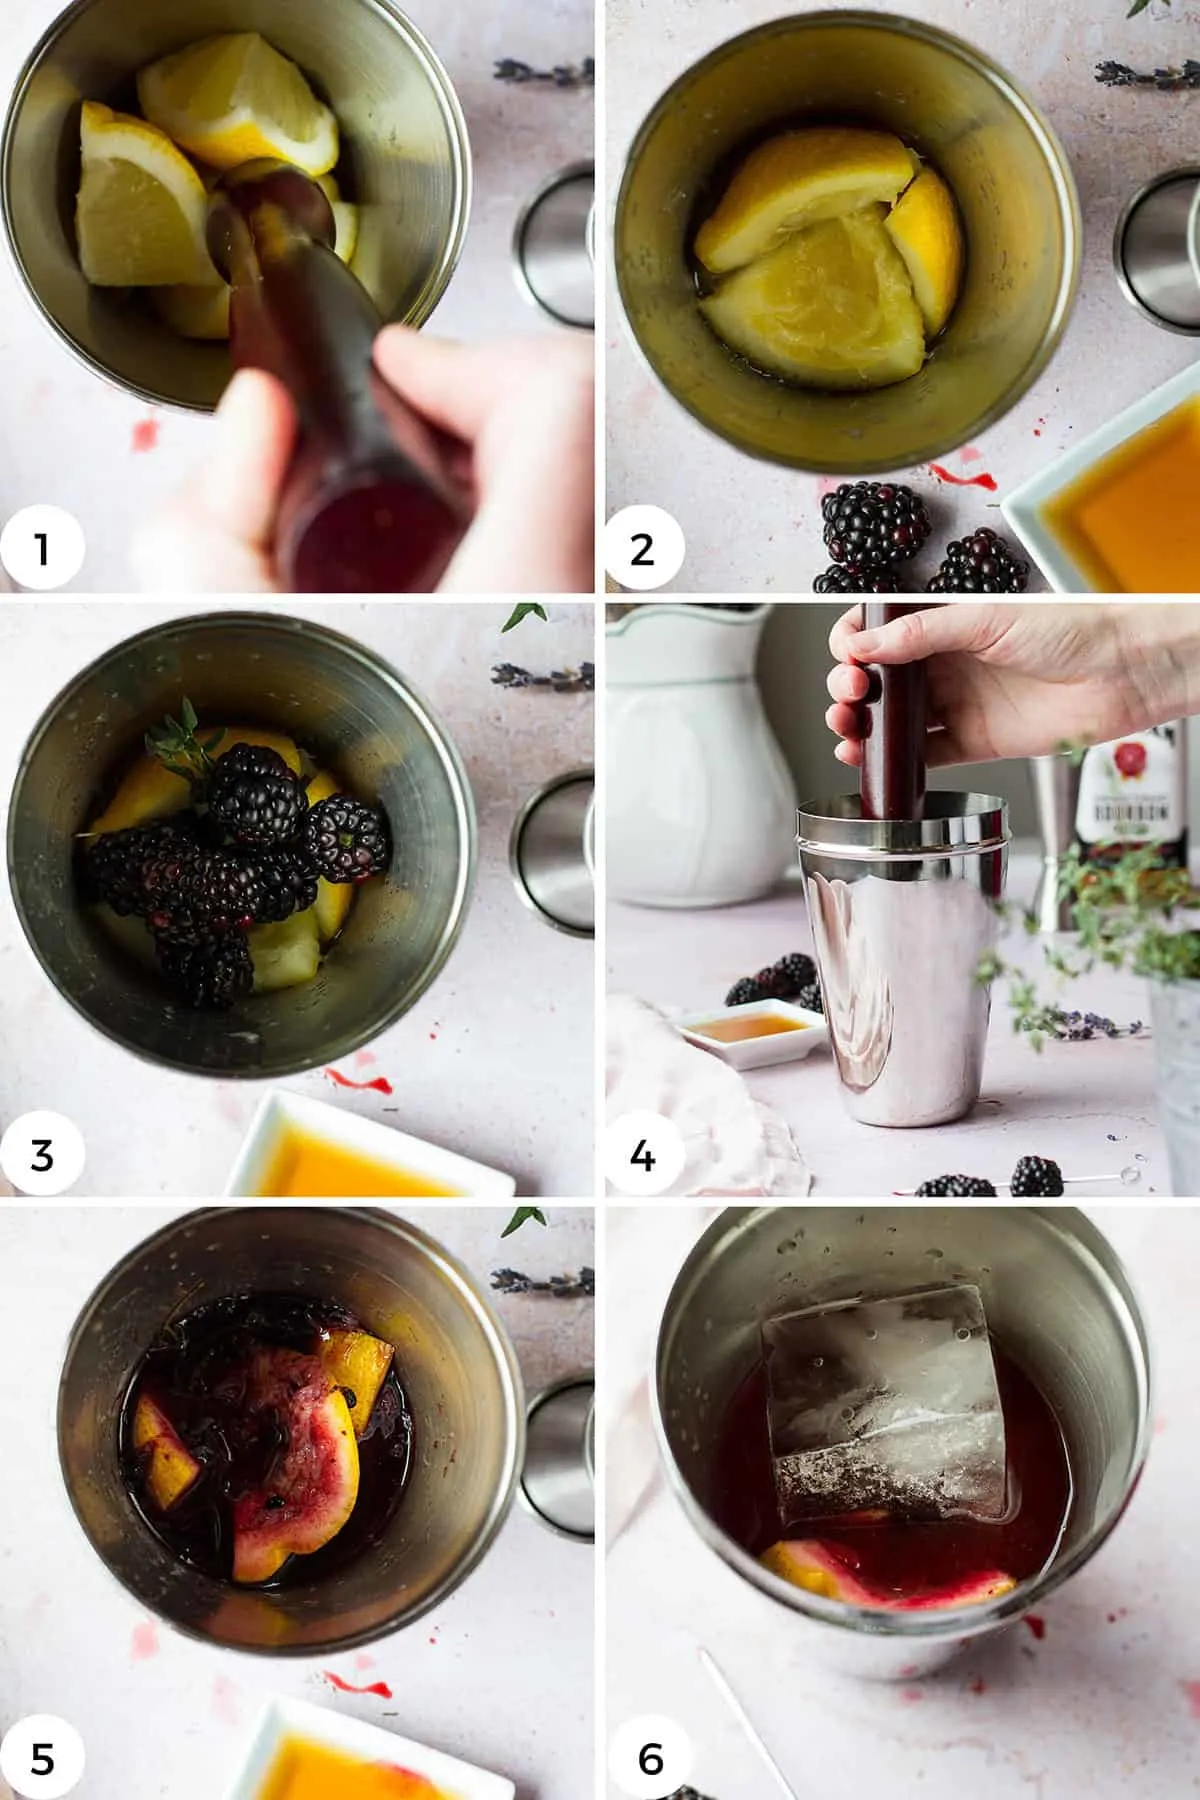 Steps to make the cocktail.